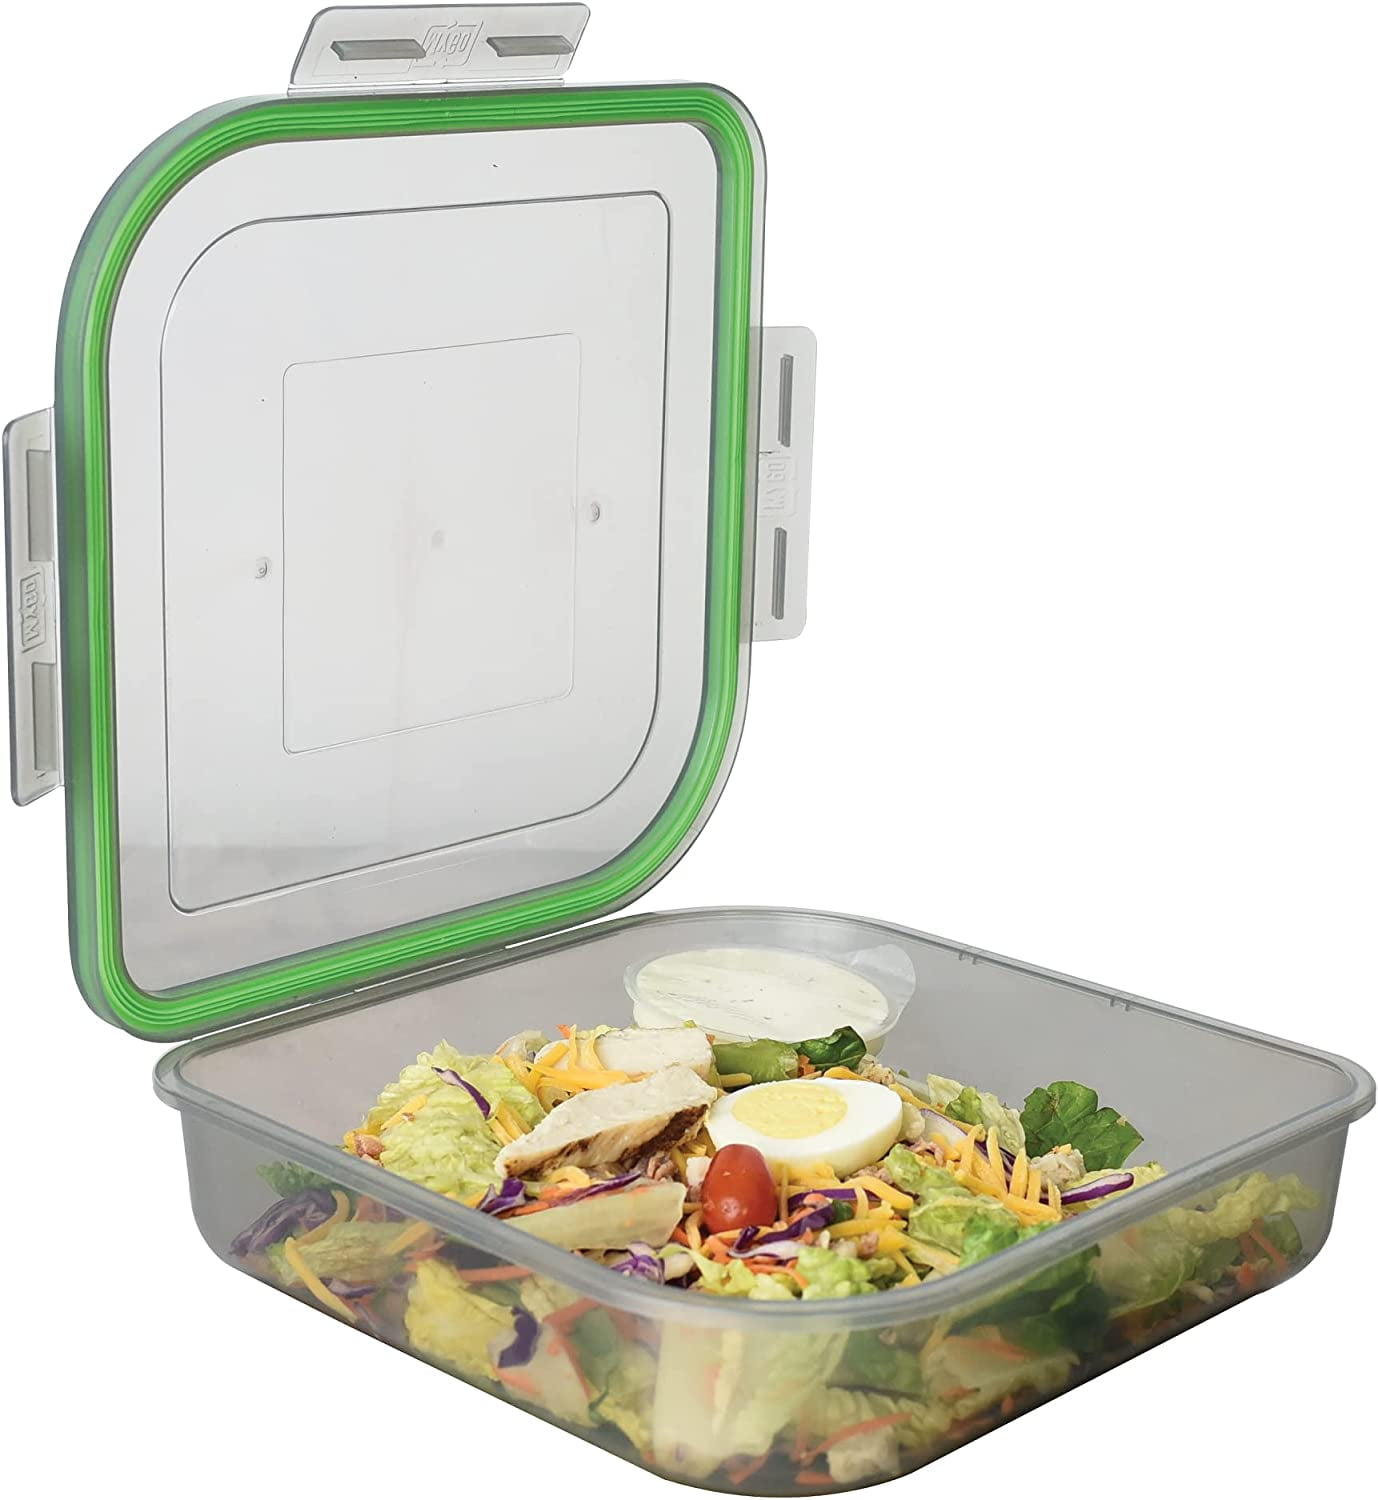 Ziploc 70941 Large Rectangle Containers & Lids w/One Press Seal, 9-Cup,  2-Ct - Bed Bath & Beyond - 27606840